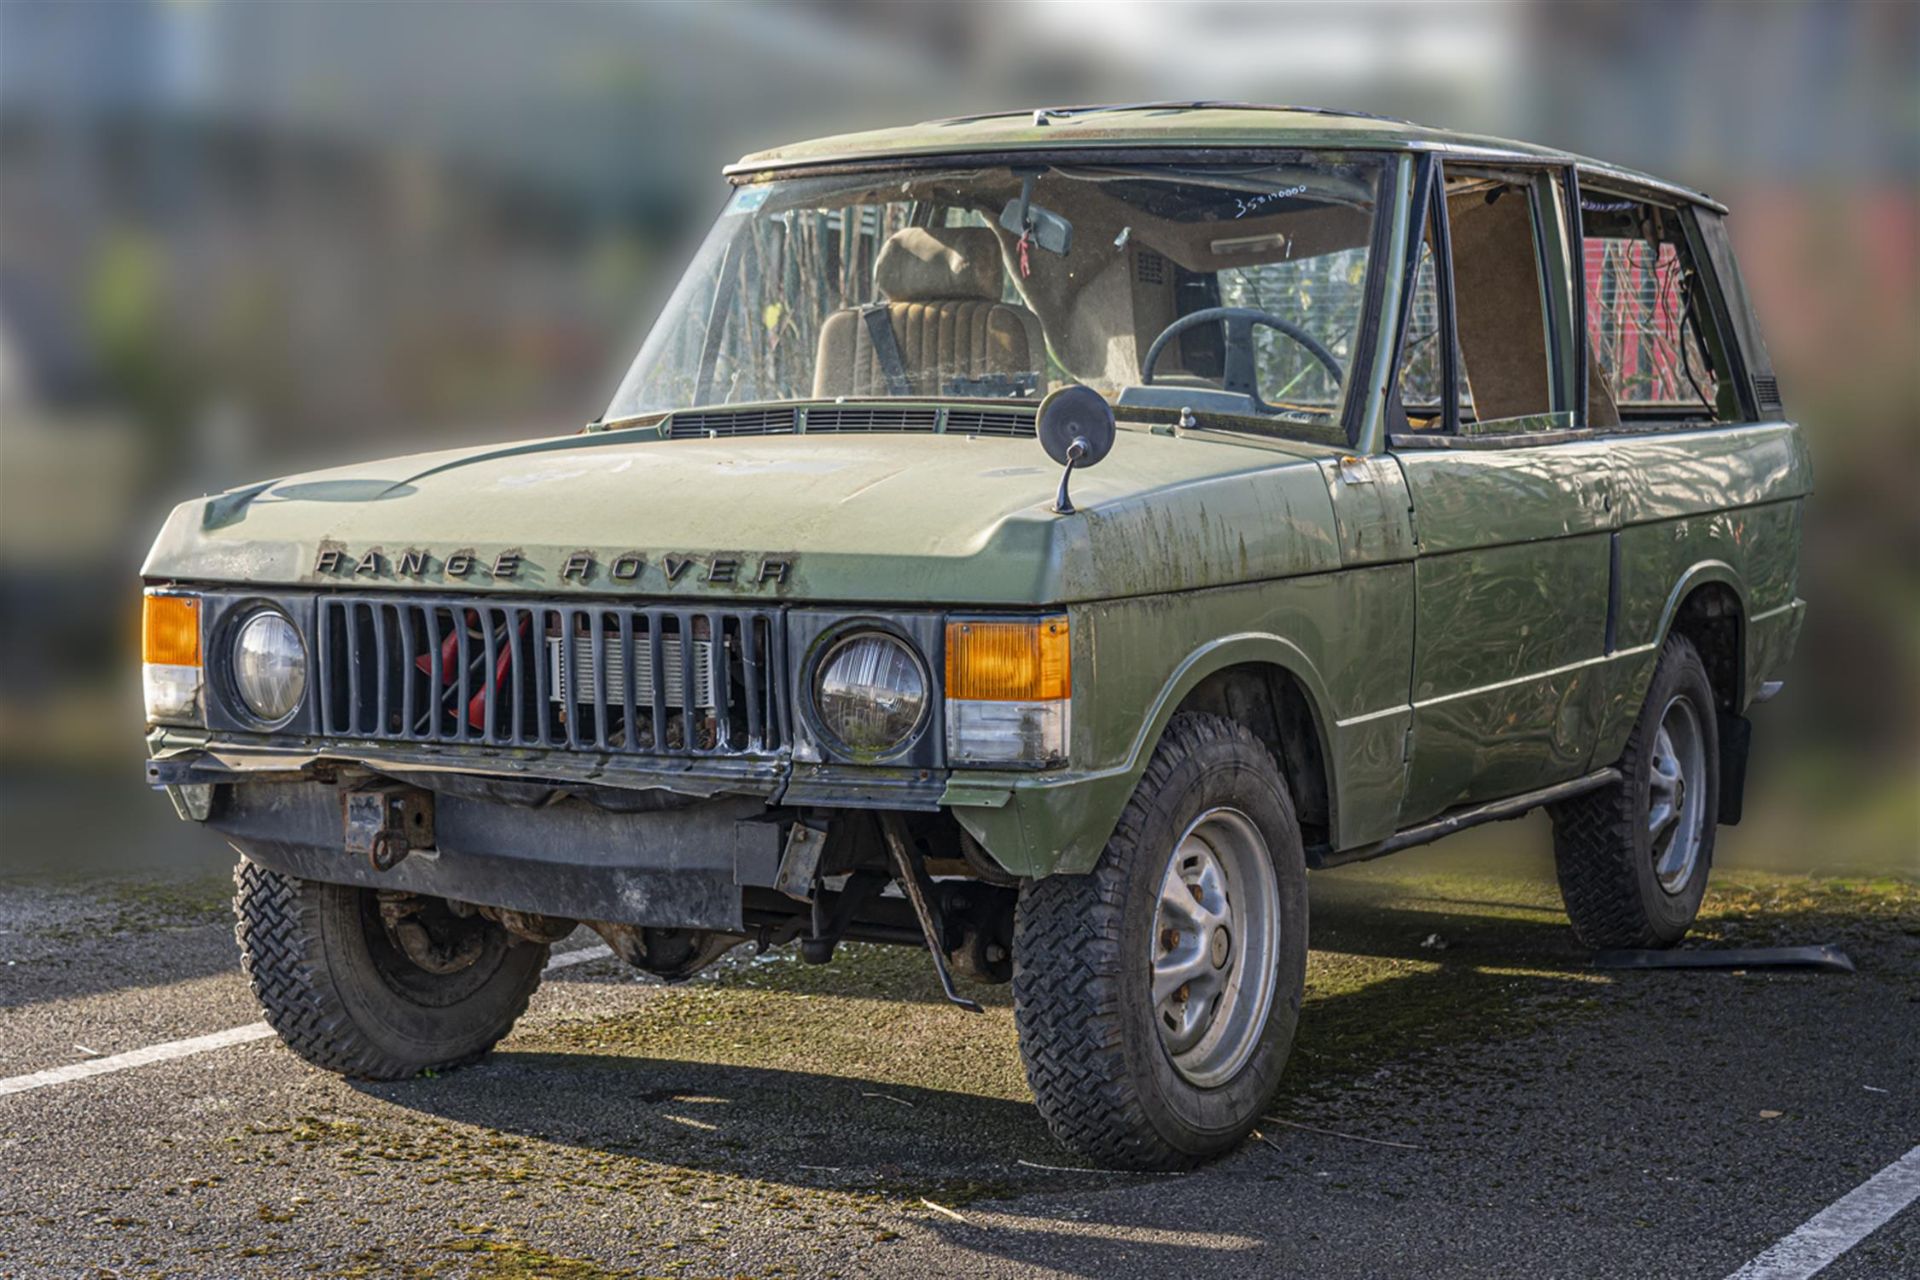 1975 Range Rover 'Suffix D' - Image 4 of 5